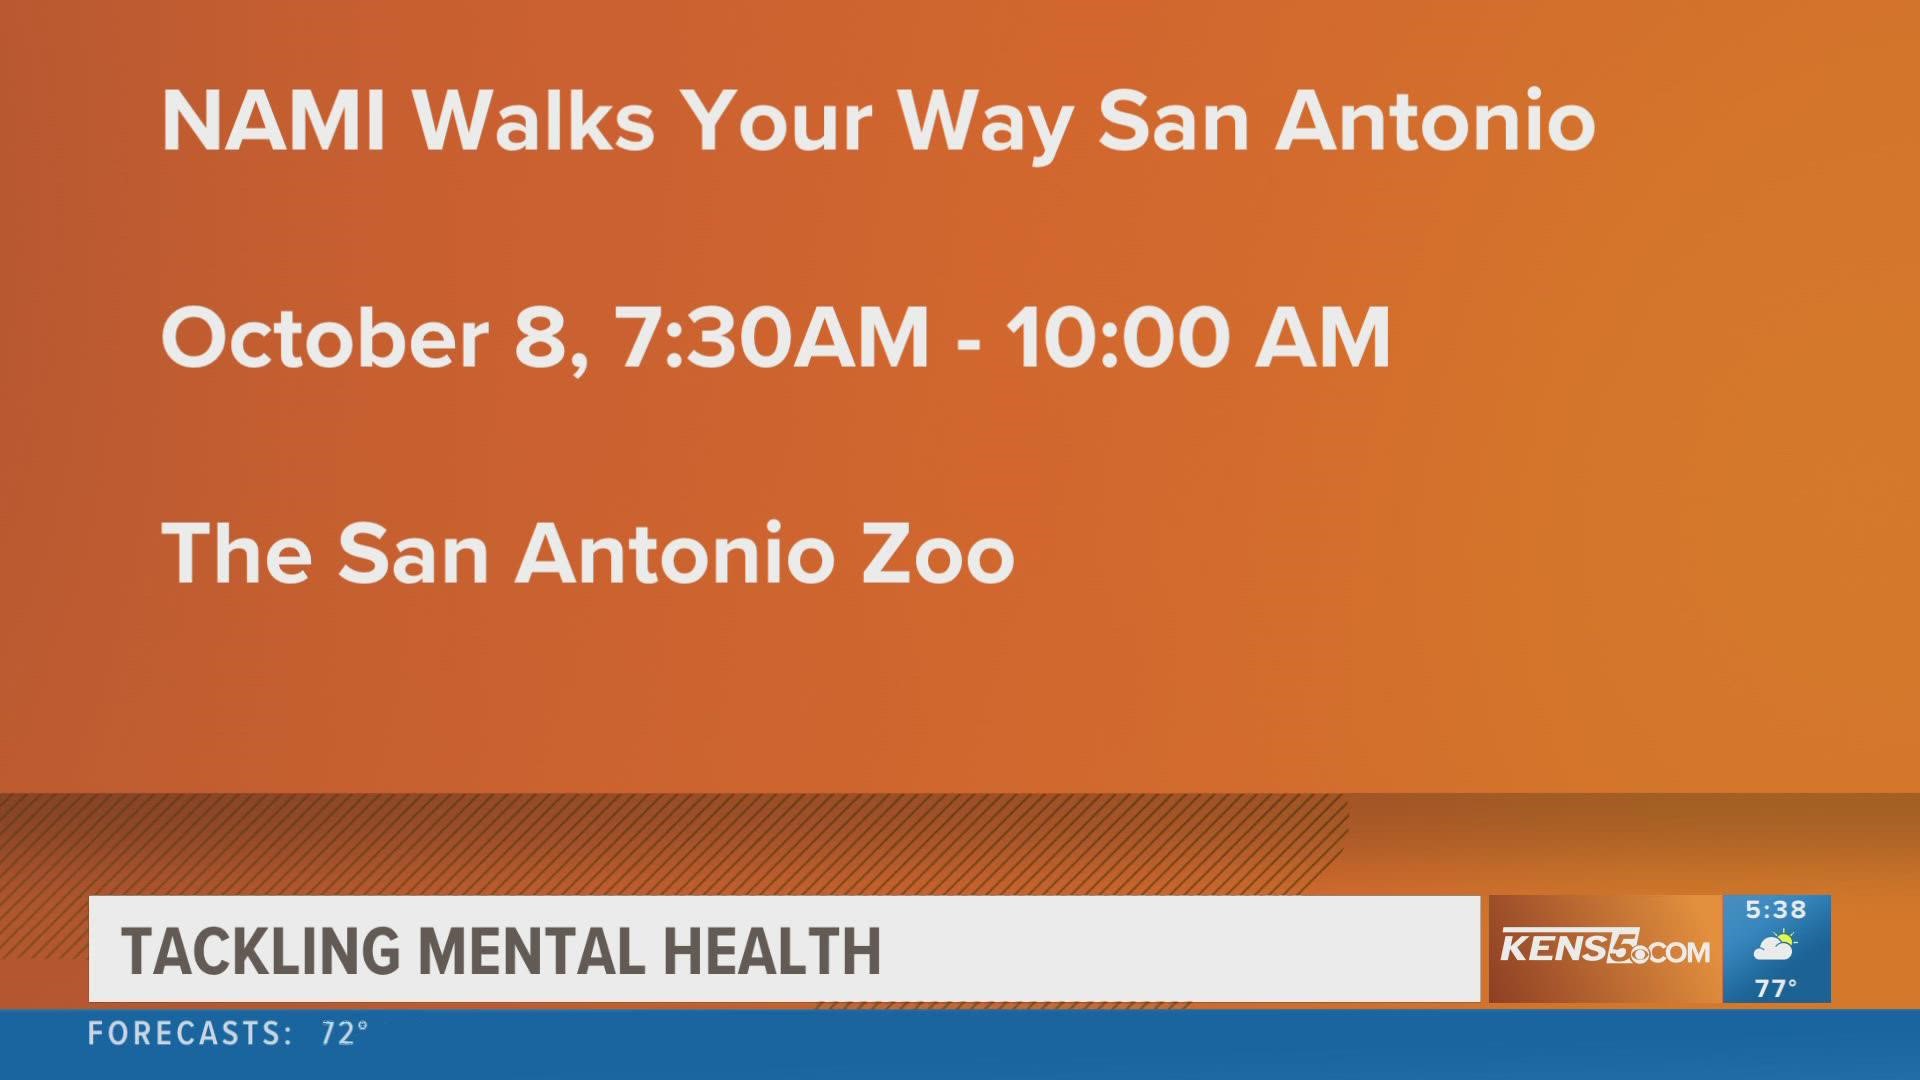 NAMI says they are stretched beyond capacity in Bexar County as more folks struggle with mental illness.